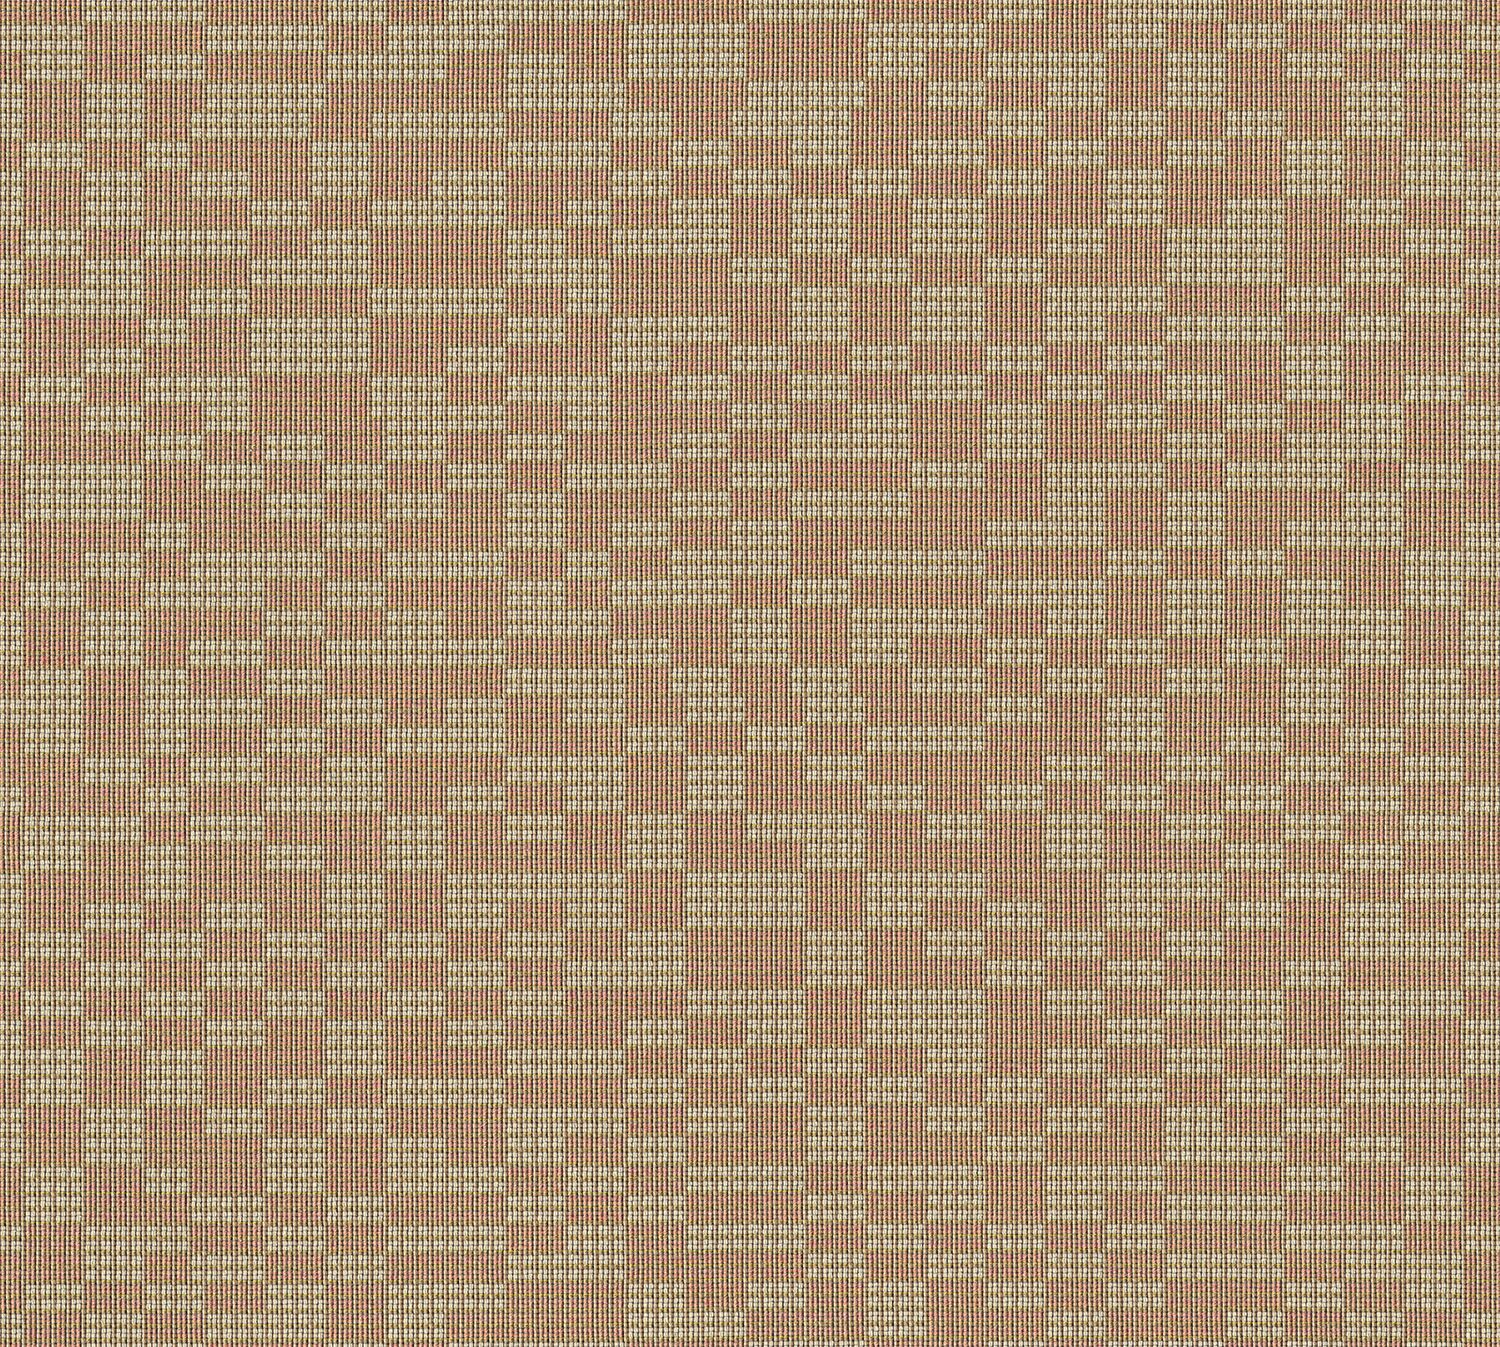 Rubric - Pink Laterite - 4112 - 02 Tileable Swatches